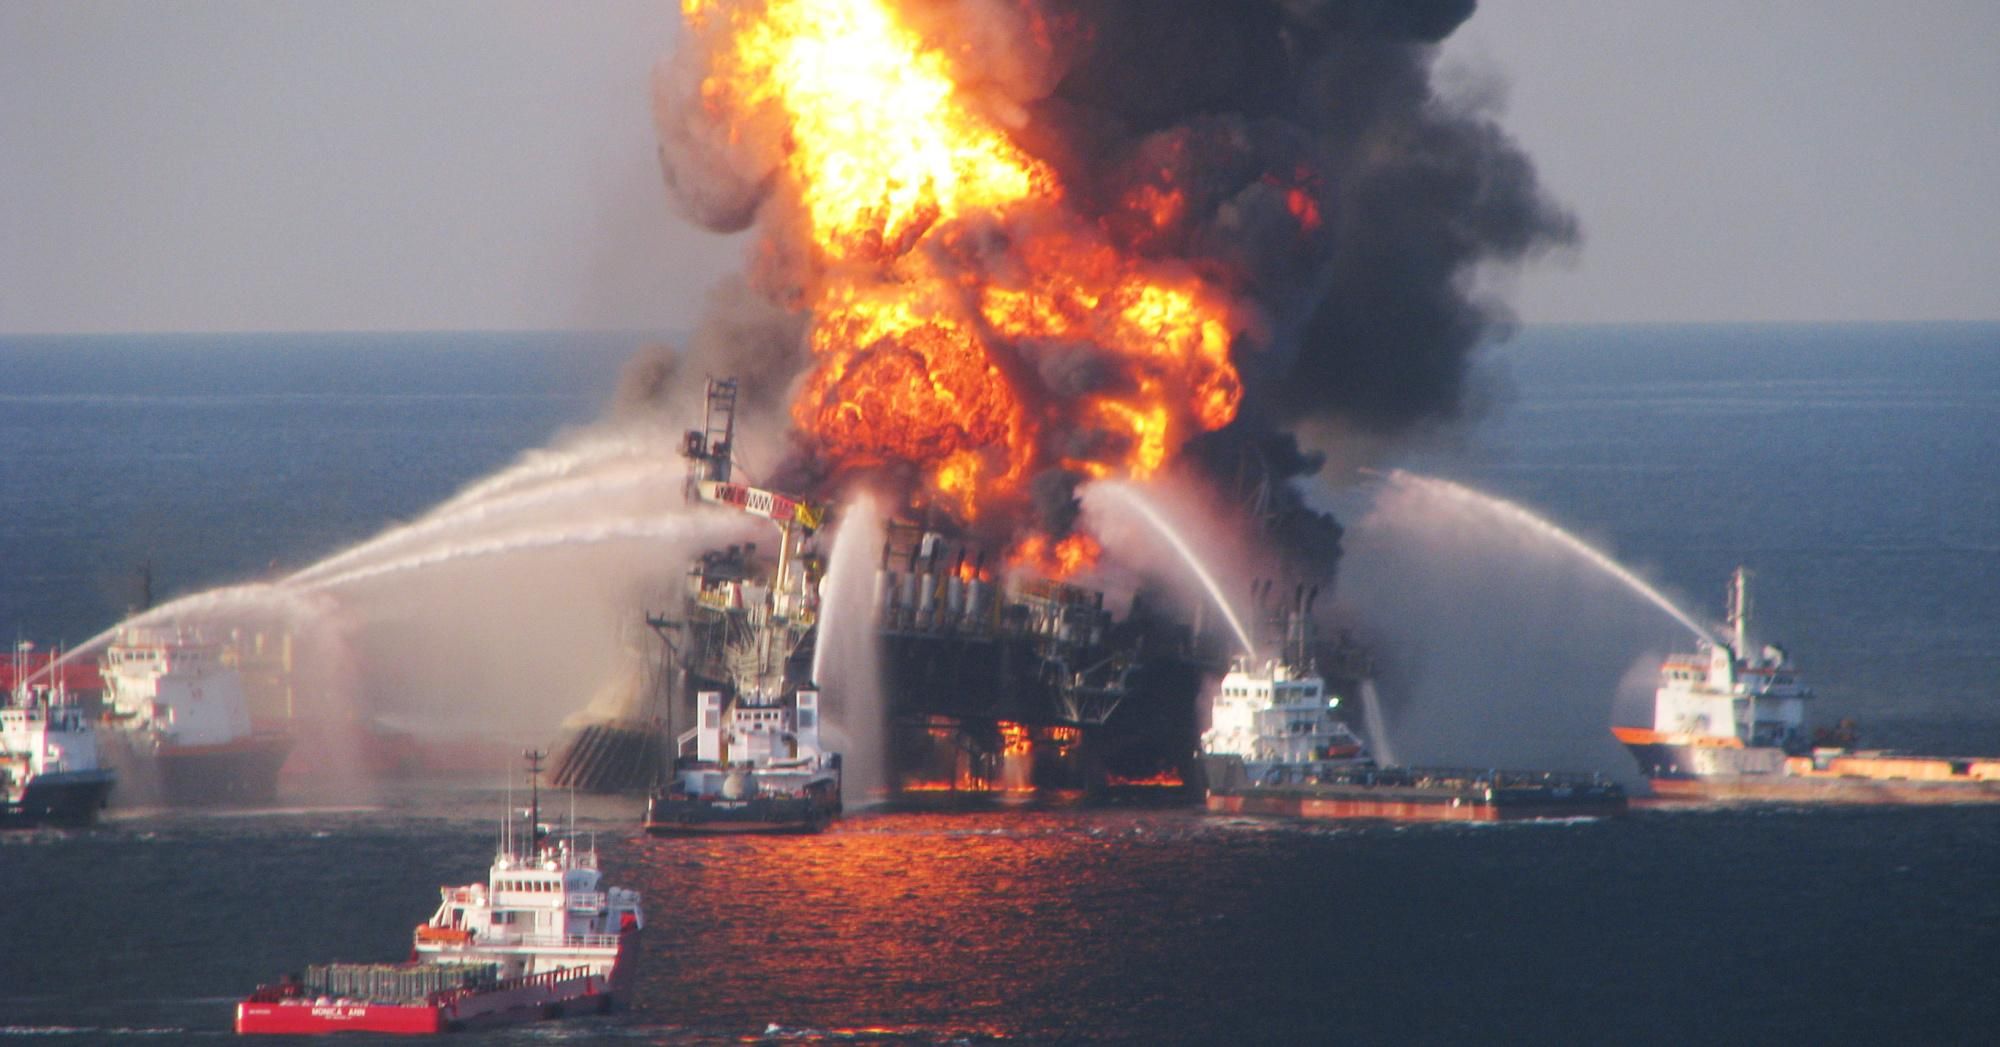 Fire boats battle a fire at the offshore oil rig Deepwater Horizon on April 21, 2010 in the Gulf of Mexico off the coast of Louisiana. (Photo: U.S. Coast Guard via Getty Images)